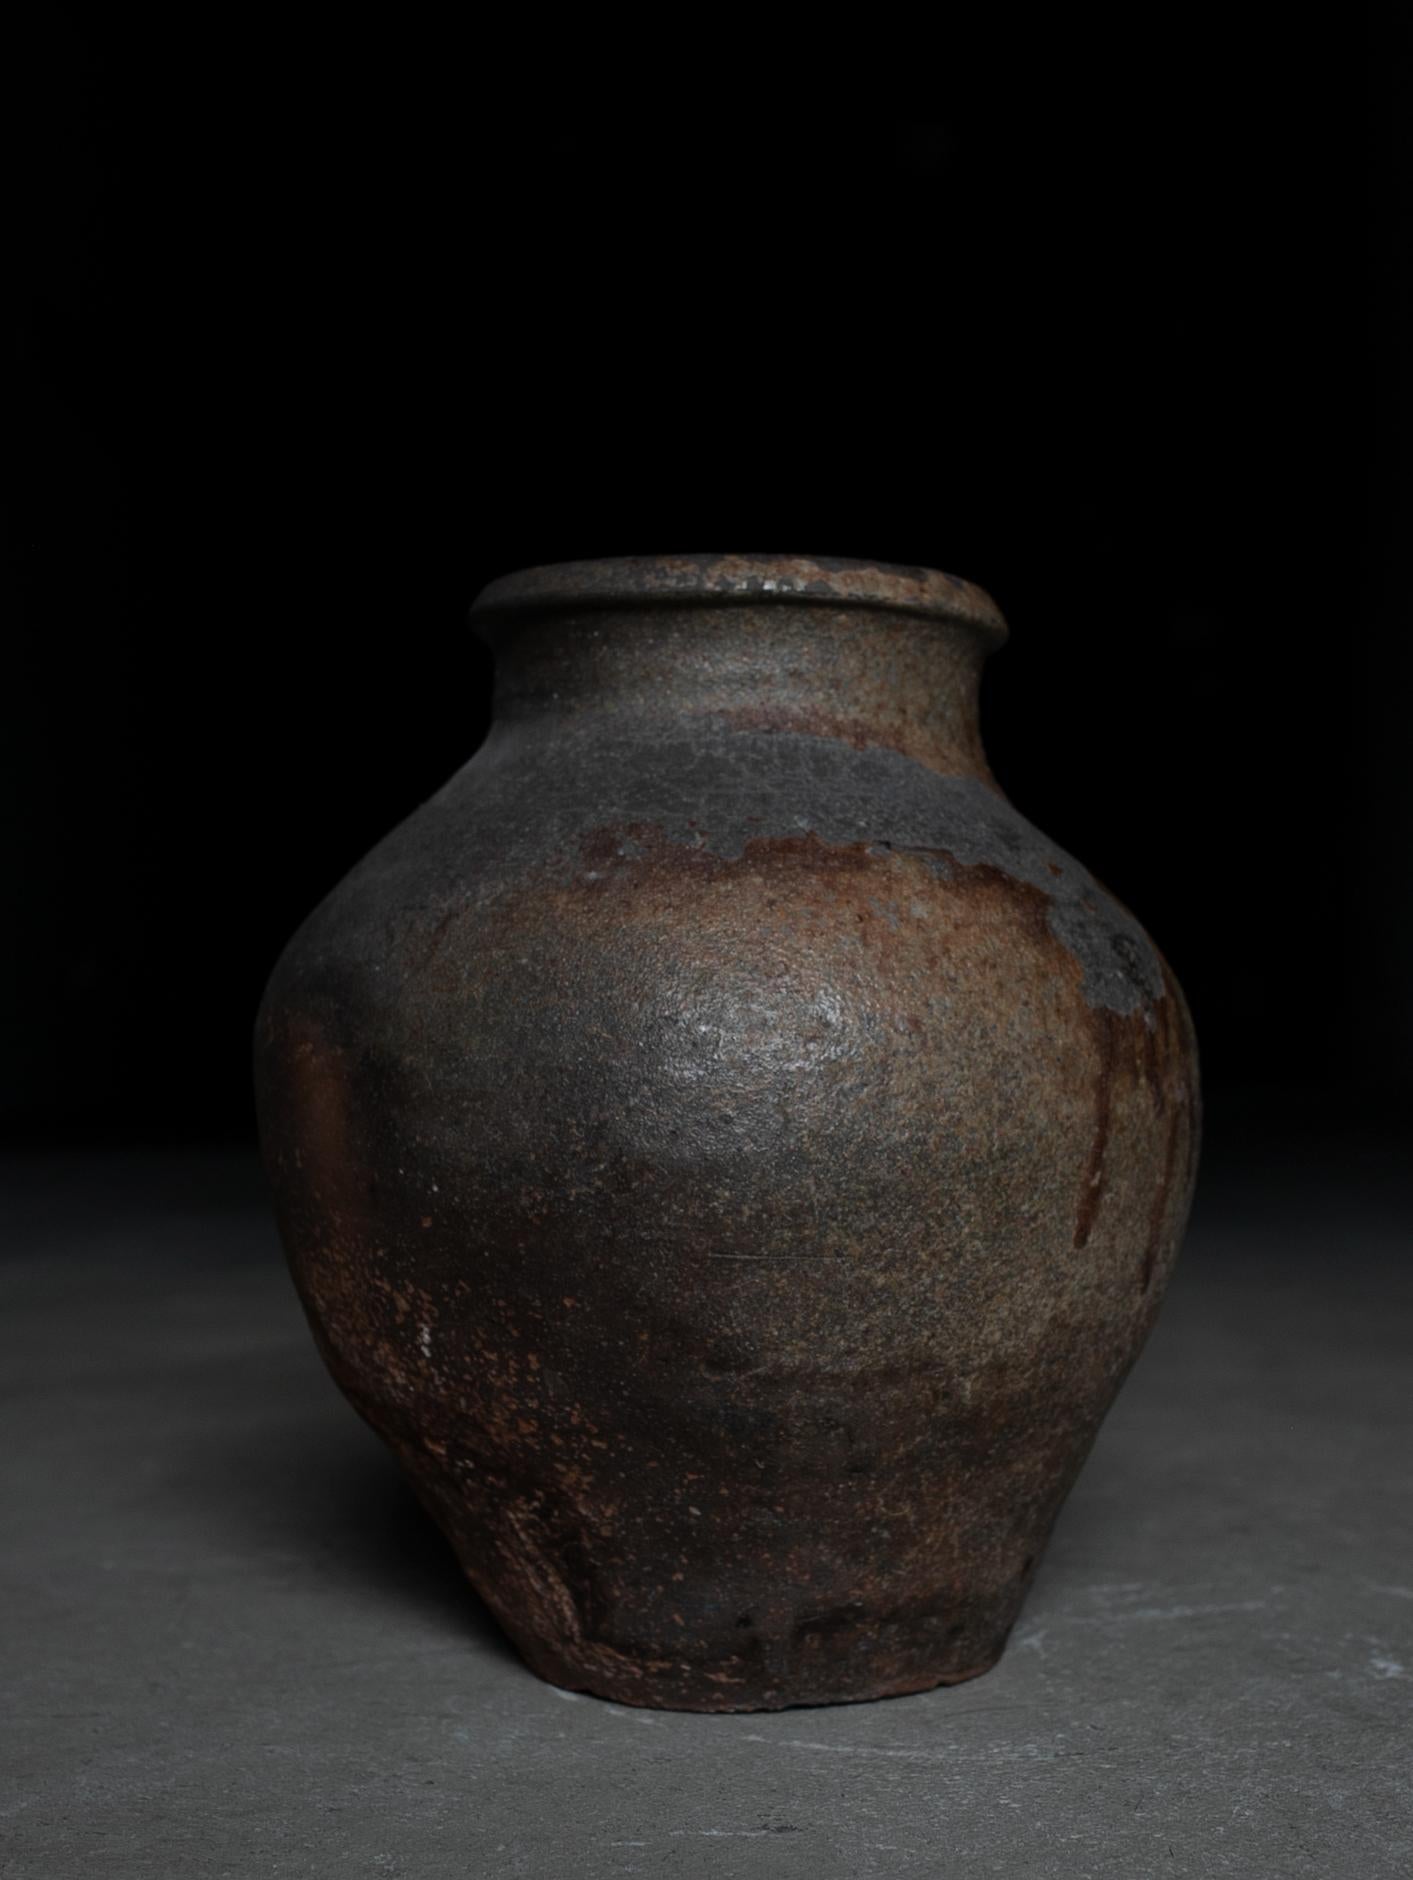 This is a very old pot in Japan.
This is a type of pottery called Tokoname ware.
Tokoname is a kiln located in Aichi prefecture in Japan.
It is said to have originated around the 12th century.
There are also six kilns in Japan which have a long